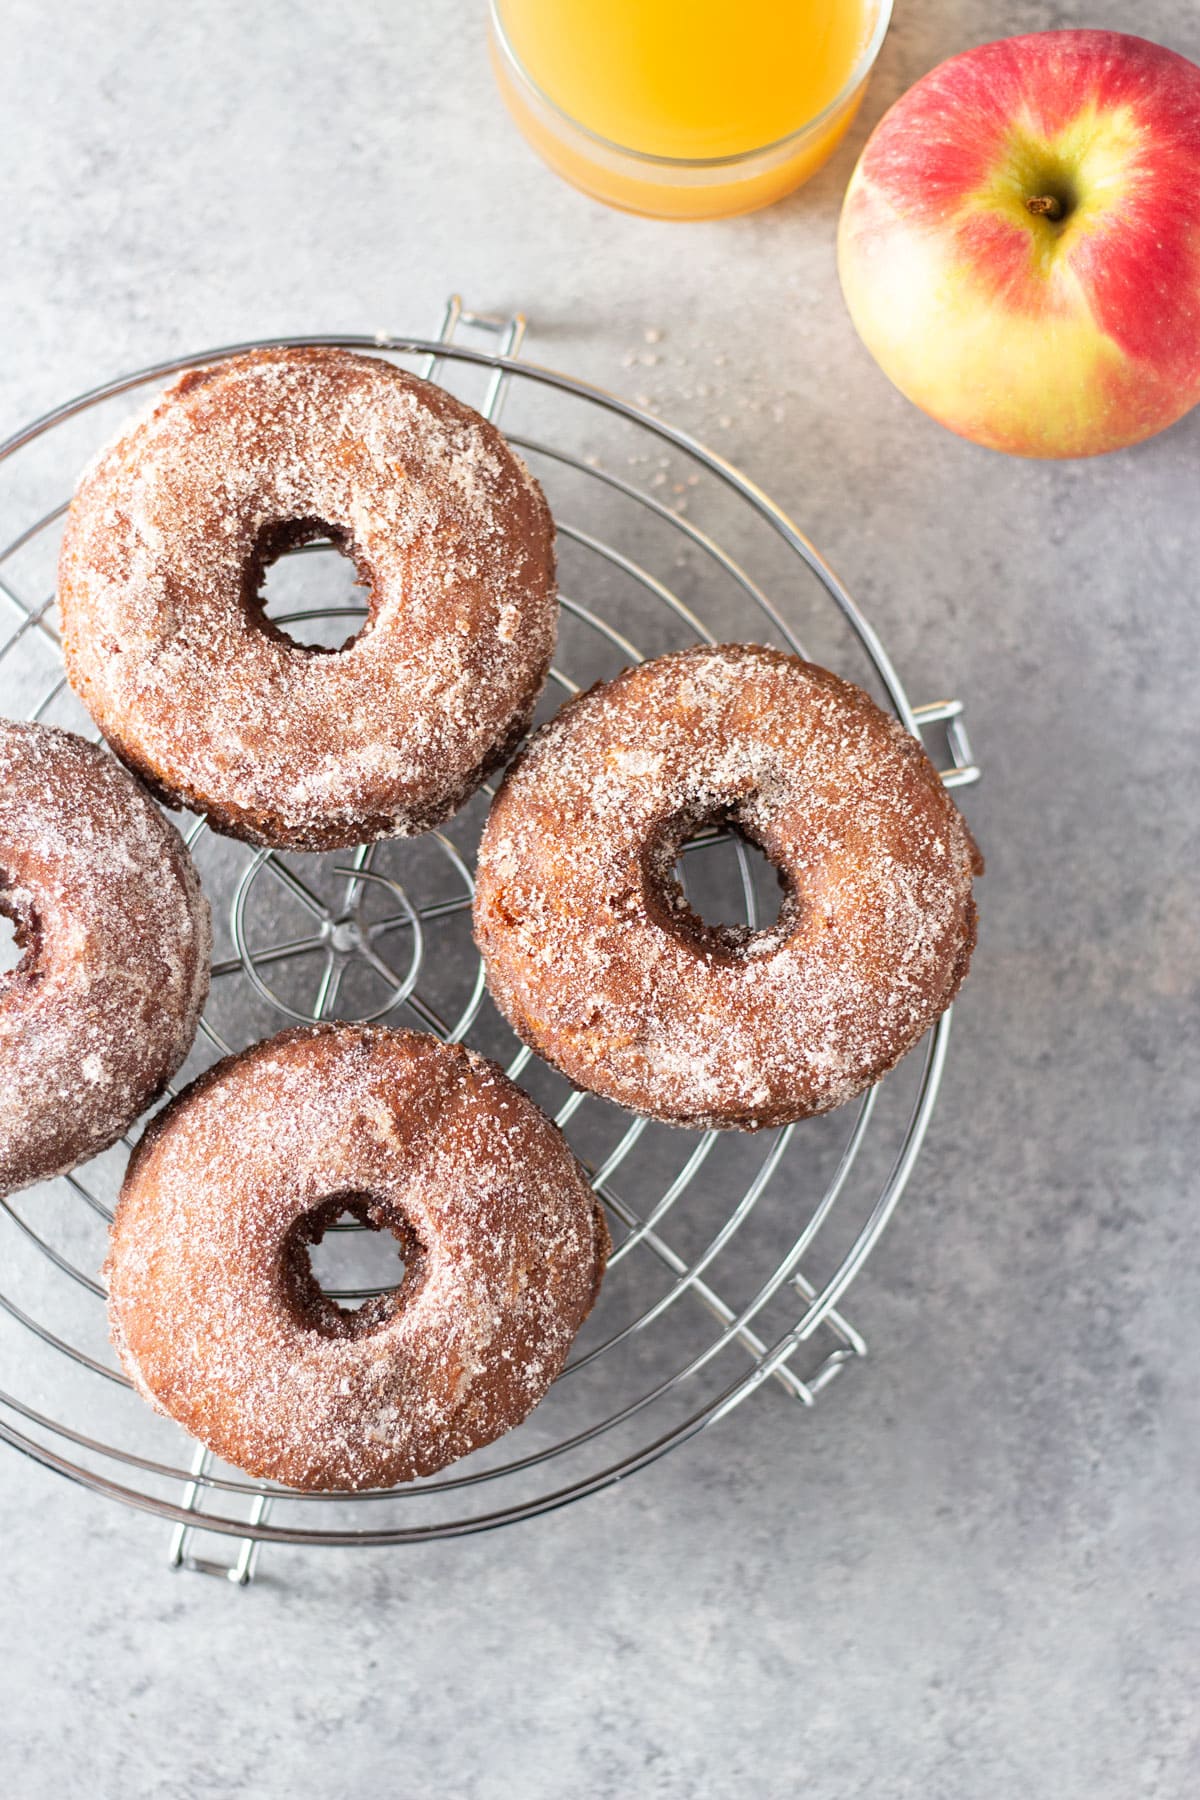 Old Fashioned Apple Cider Donuts on a wire rack next to an apple and glass of apple cider.